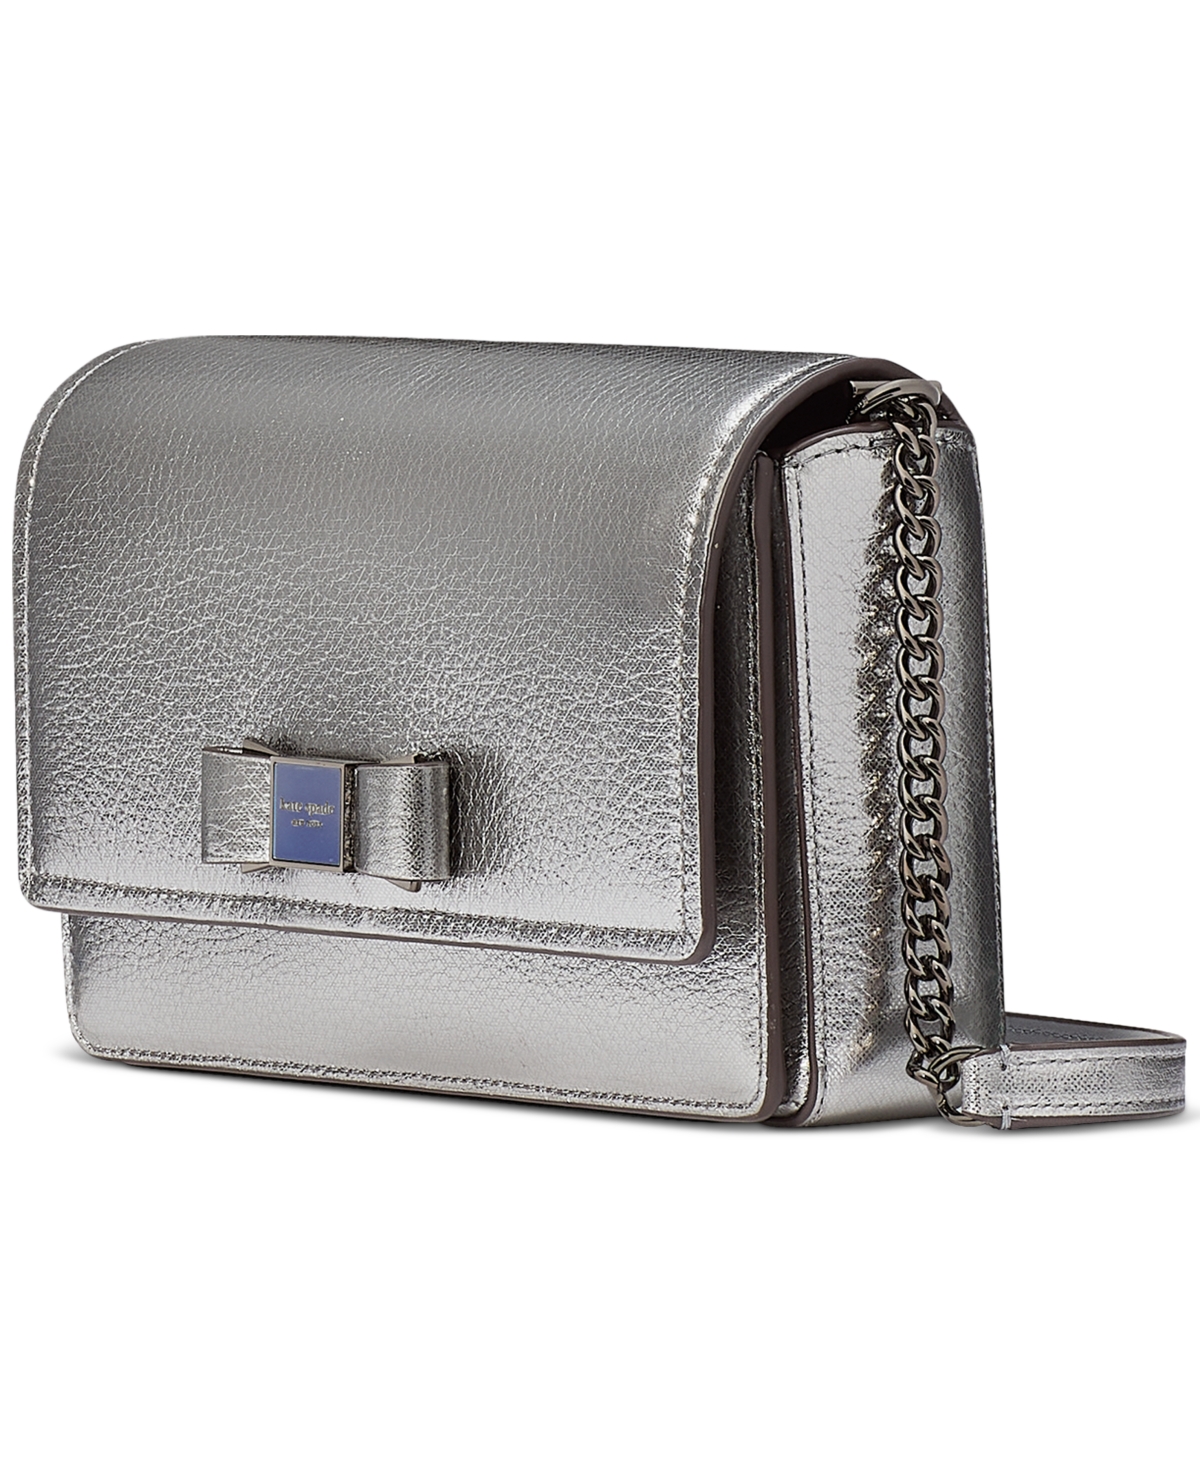 Morgan Bow Embellished Metallic Leather Flap Chain Wallet - Silver